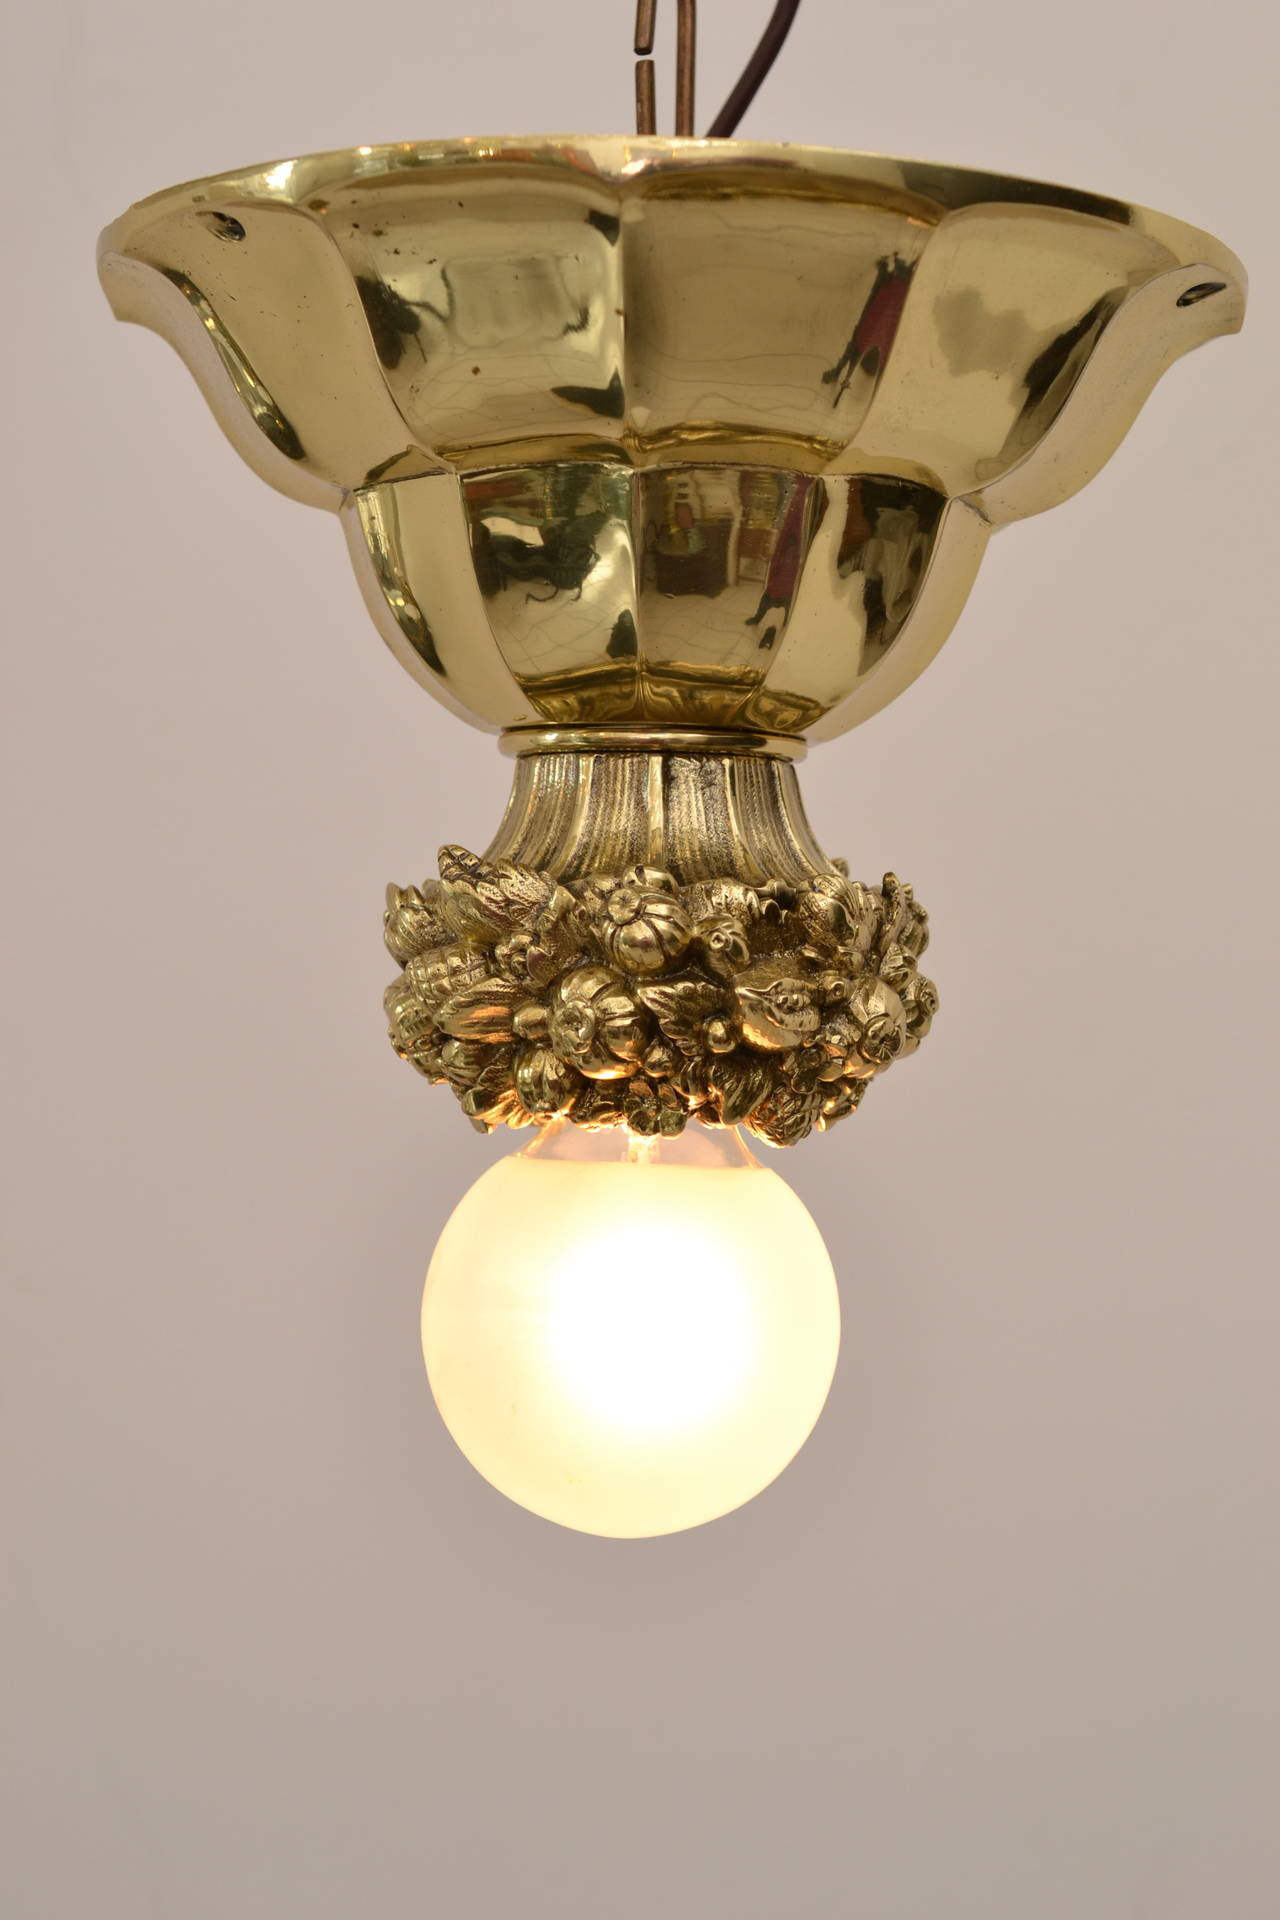 Massive brass ceiling lamp
polished and stove enamelled